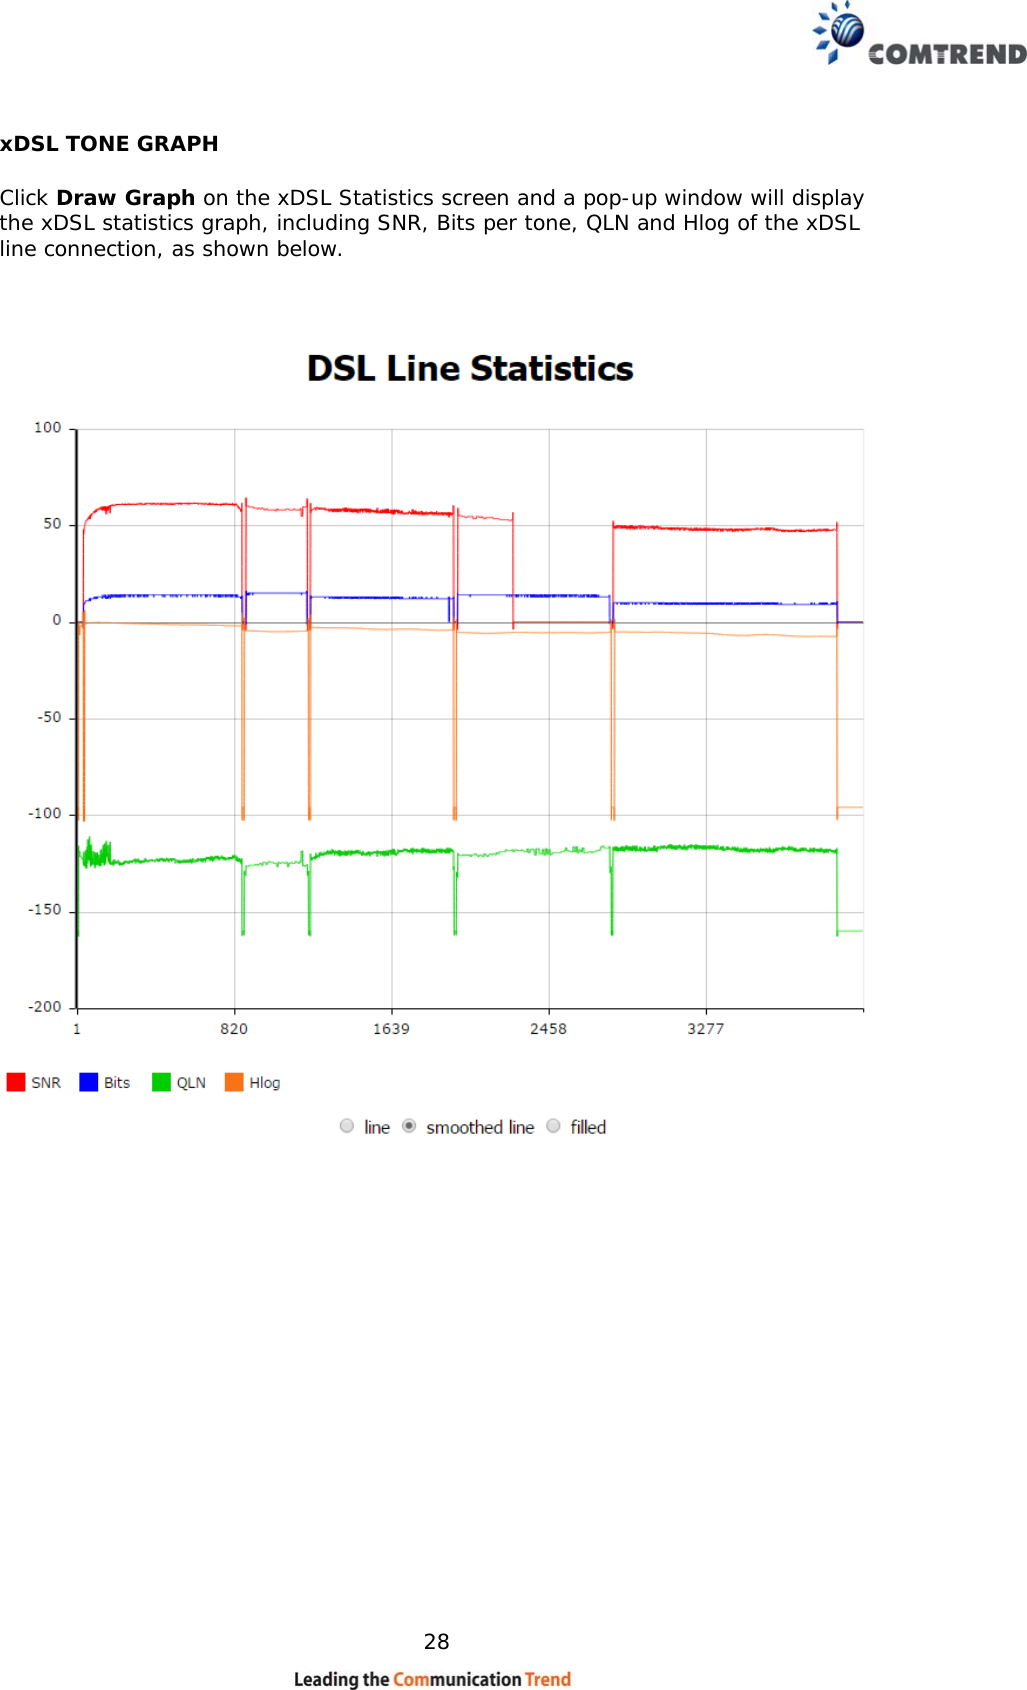    28 xDSL TONE GRAPH  Click Draw Graph on the xDSL Statistics screen and a pop-up window will display the xDSL statistics graph, including SNR, Bits per tone, QLN and Hlog of the xDSL line connection, as shown below.      